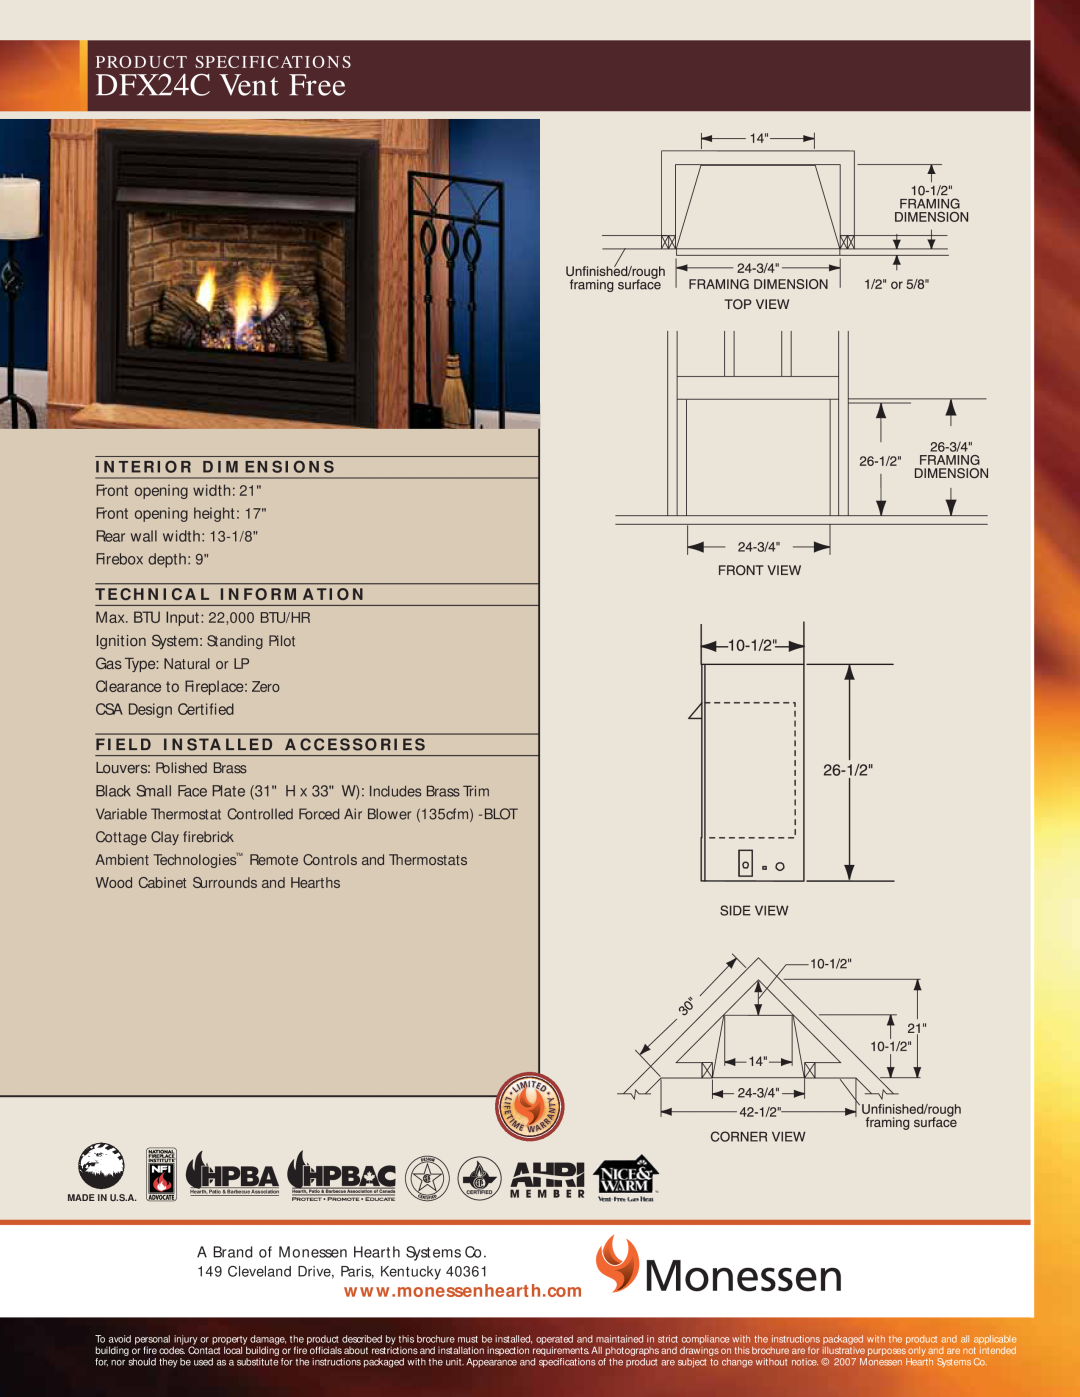 Monessen Hearth specifications DFX24C Vent Free, Product Specifications, Front opening width Front opening height 